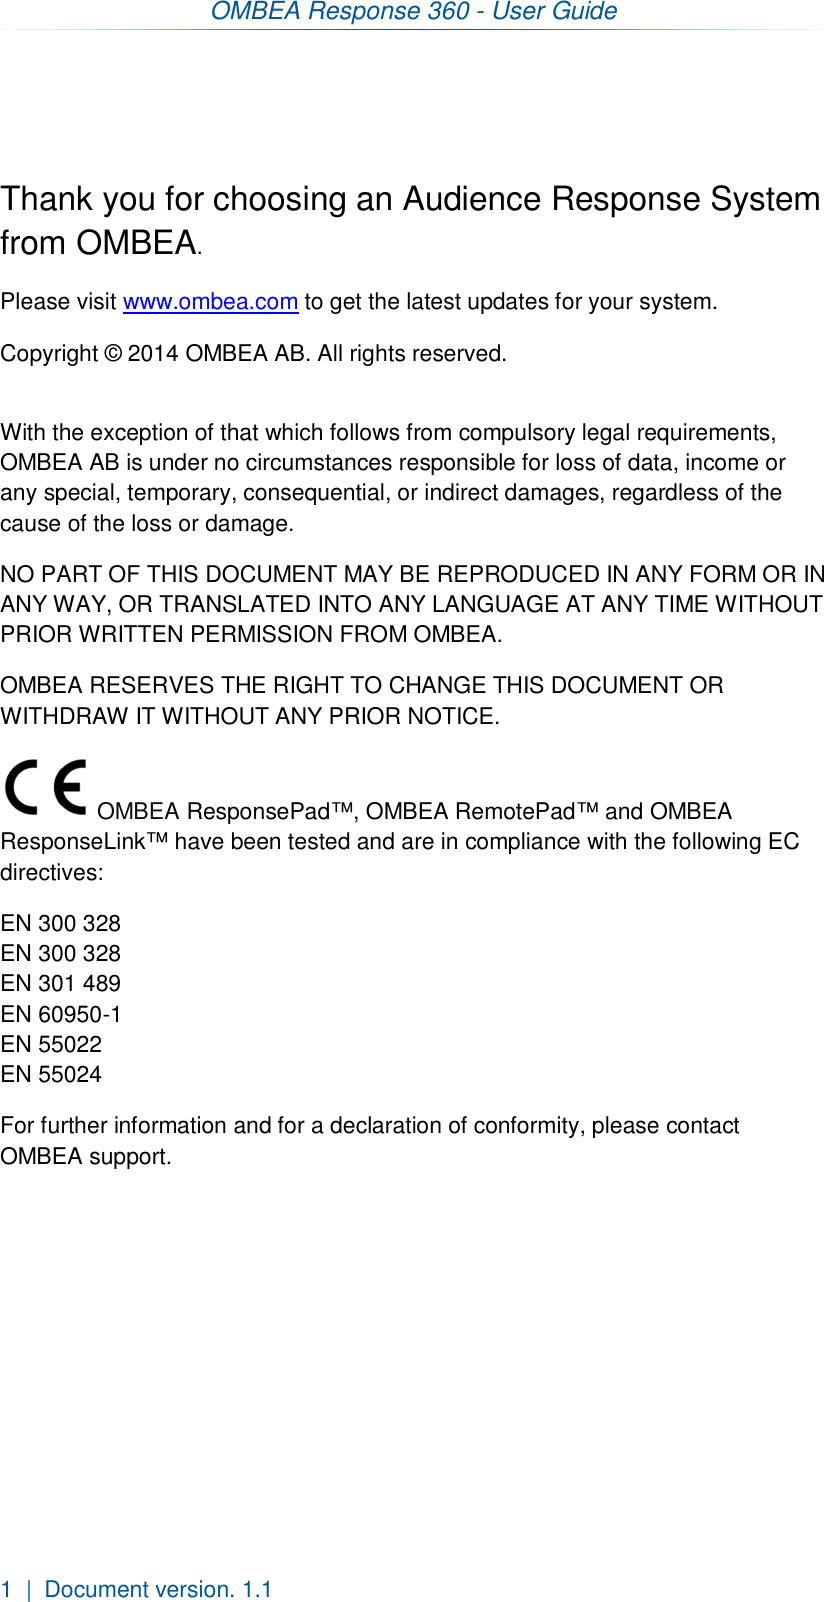 OMBEA Response 360 - User Guide  1  |  Document version. 1.1    Thank you for choosing an Audience Response System from OMBEA.  Please visit www.ombea.com to get the latest updates for your system. Copyright © 2014 OMBEA AB. All rights reserved.  With the exception of that which follows from compulsory legal requirements, OMBEA AB is under no circumstances responsible for loss of data, income or any special, temporary, consequential, or indirect damages, regardless of the cause of the loss or damage. NO PART OF THIS DOCUMENT MAY BE REPRODUCED IN ANY FORM OR IN ANY WAY, OR TRANSLATED INTO ANY LANGUAGE AT ANY TIME WITHOUT PRIOR WRITTEN PERMISSION FROM OMBEA. OMBEA RESERVES THE RIGHT TO CHANGE THIS DOCUMENT OR WITHDRAW IT WITHOUT ANY PRIOR NOTICE.  OMBEA ResponsePad™, OMBEA RemotePad™ and OMBEA ResponseLink™ have been tested and are in compliance with the following EC directives: EN 300 328 EN 300 328 EN 301 489 EN 60950-1 EN 55022 EN 55024 For further information and for a declaration of conformity, please contact OMBEA support.      